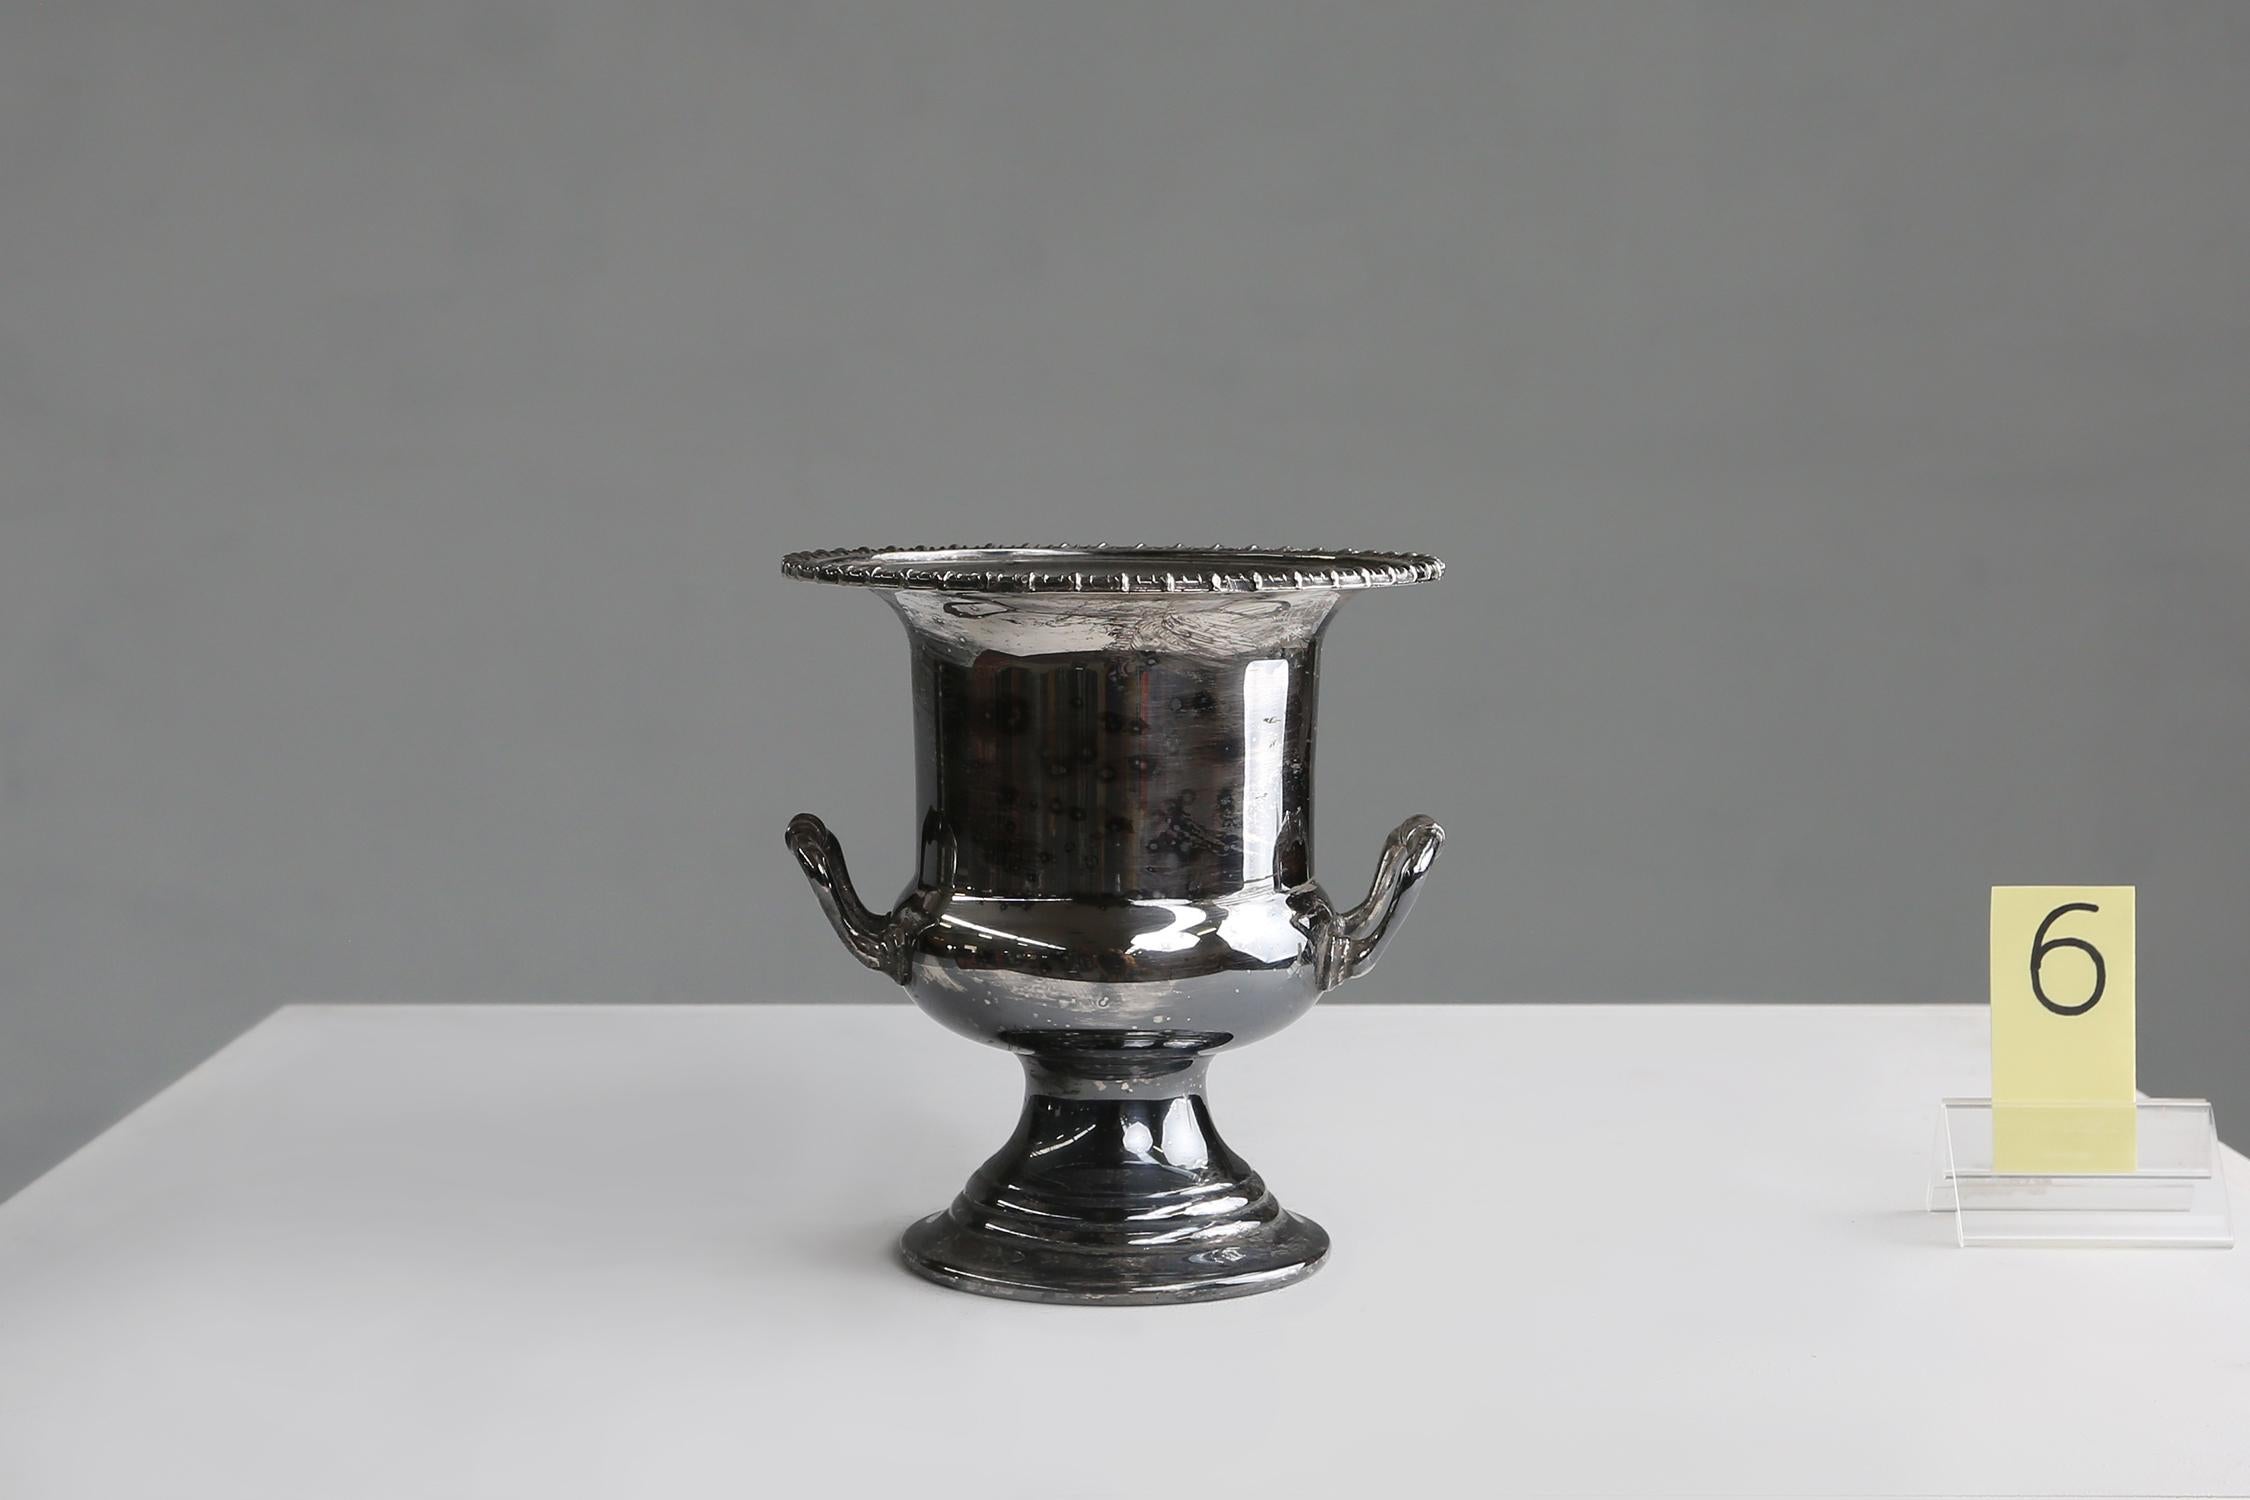 Made in France, circa 1900.
This is a silver brass ice bucket or wine cooler.